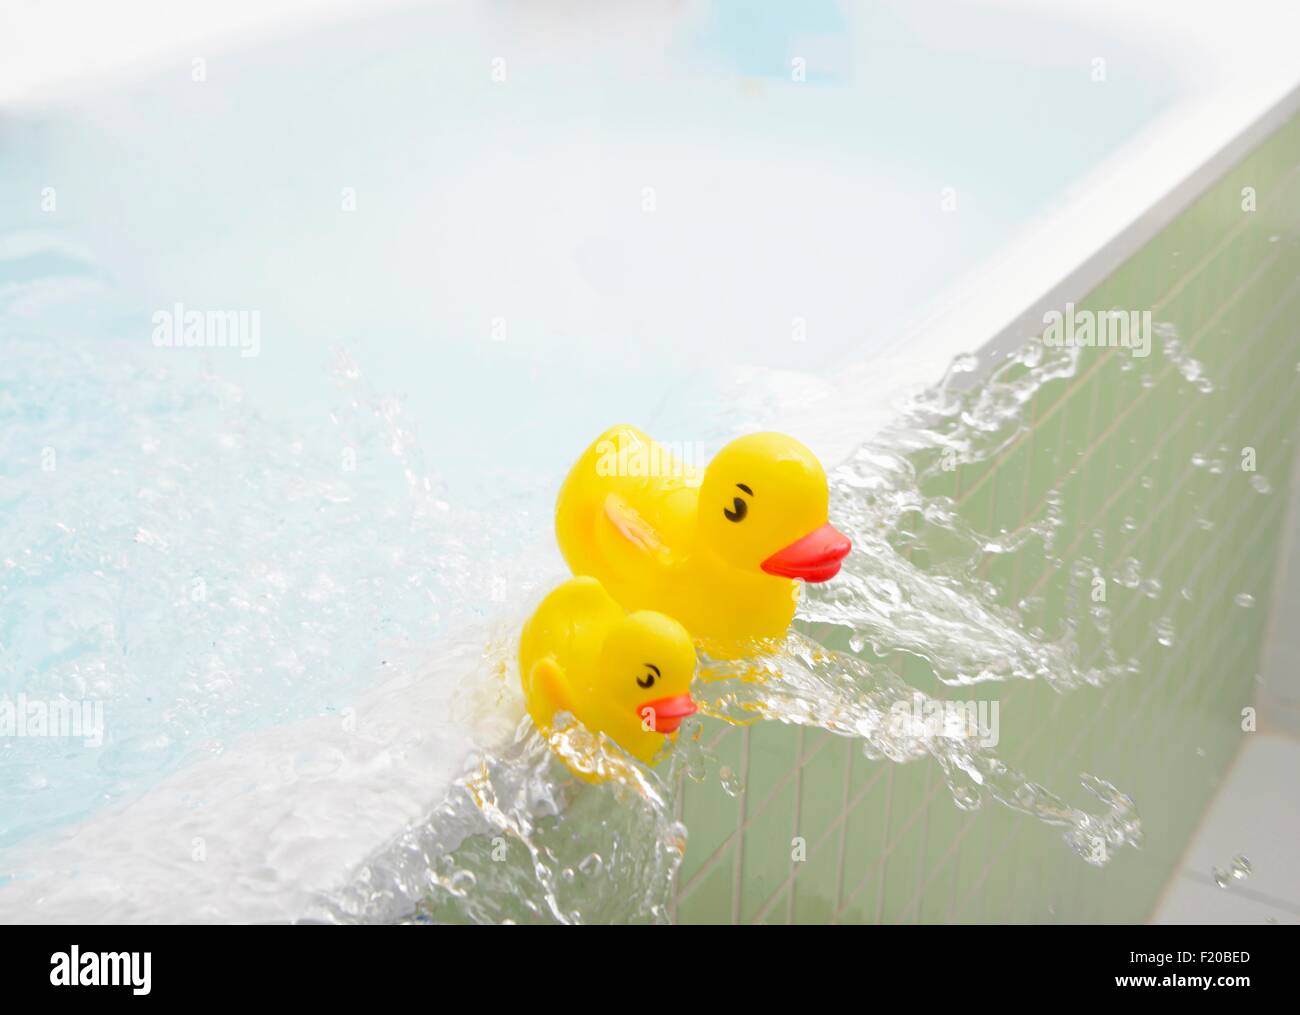 Rubber ducks falling out of bath overflowing with water Stock Photo